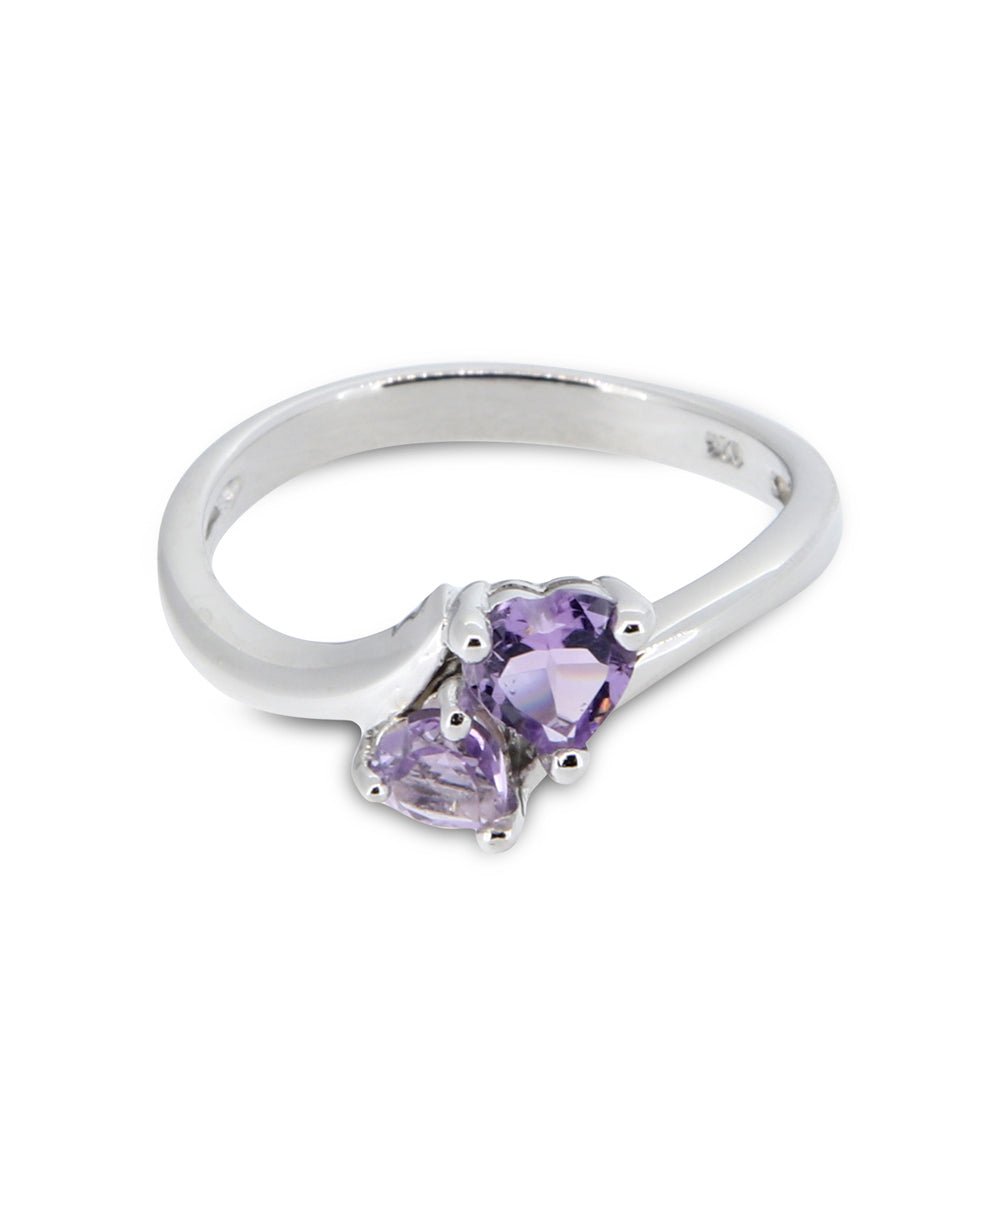 Serenity and Wisdom Duo-Amethyst Gemstone Sterling Ring - Rings Size 6